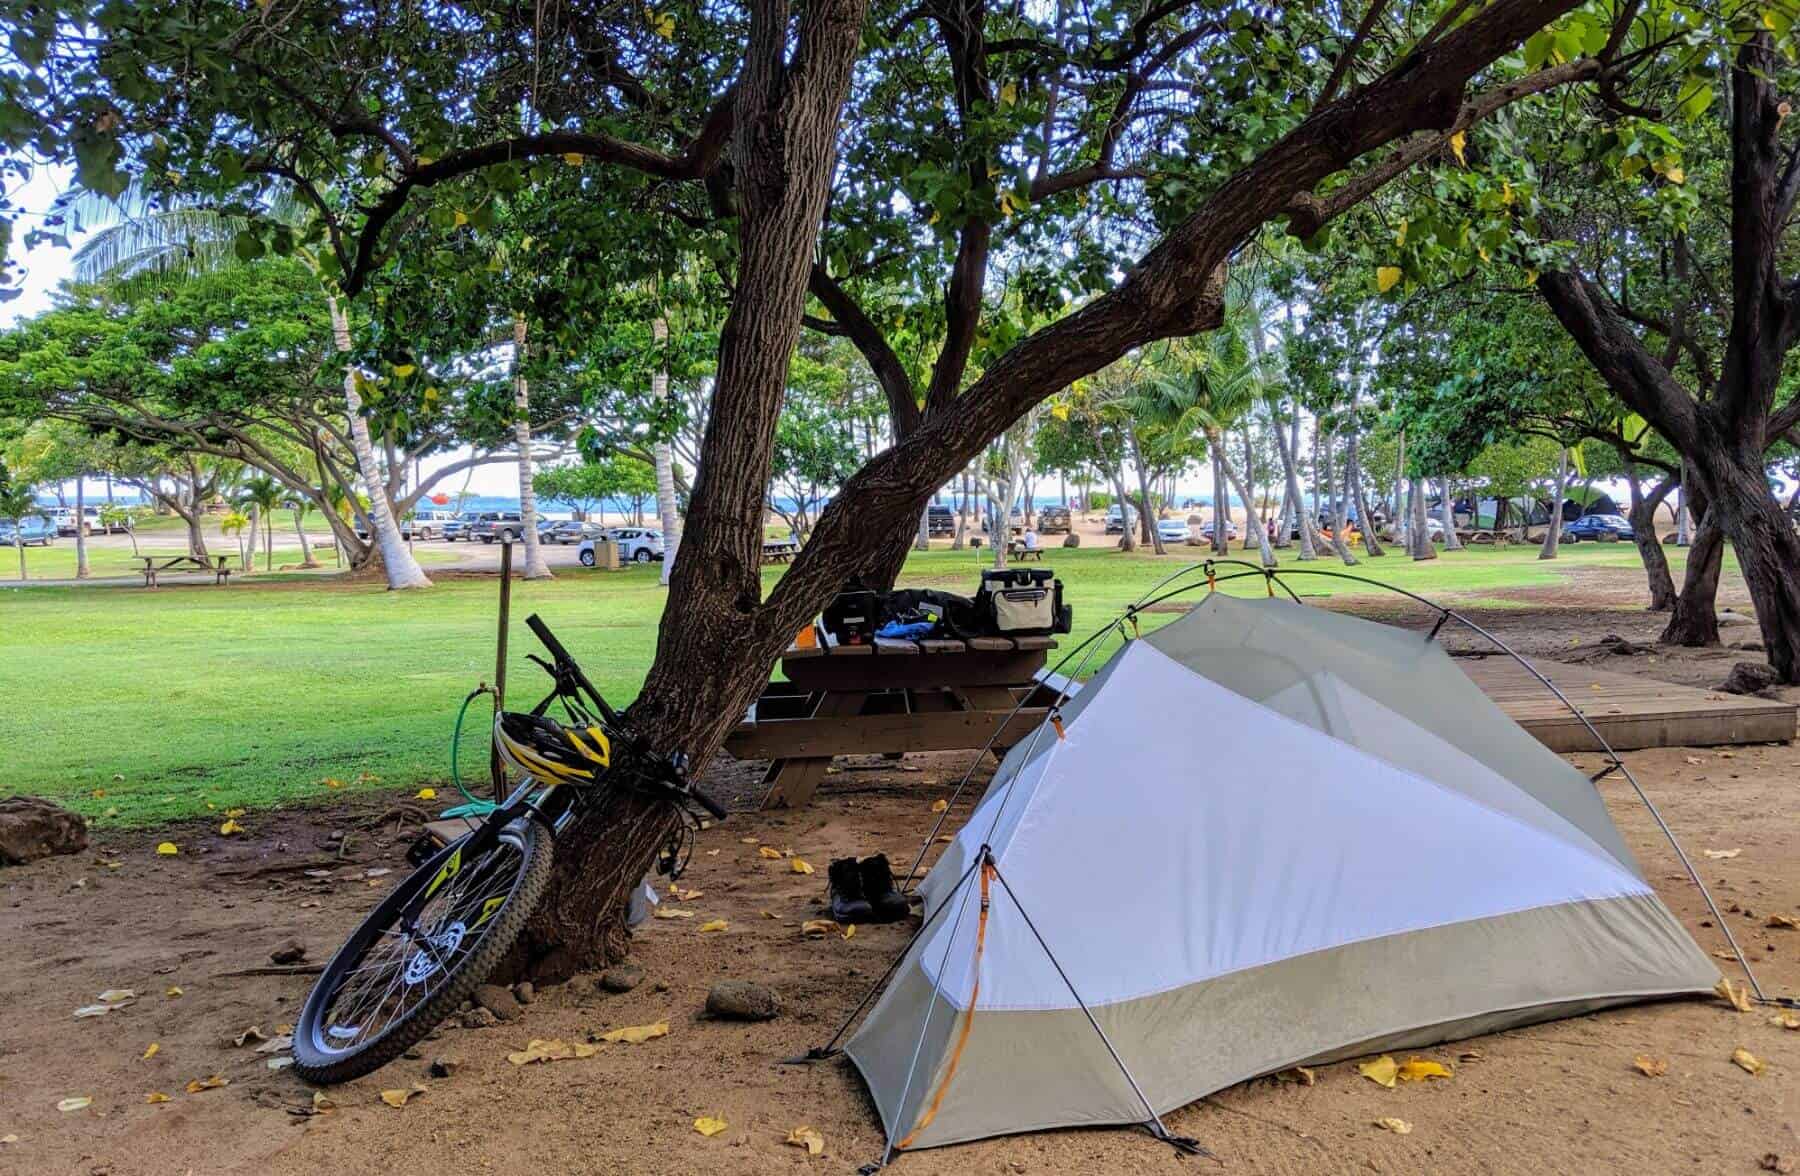 Lanai camping tent and bicycle on tree